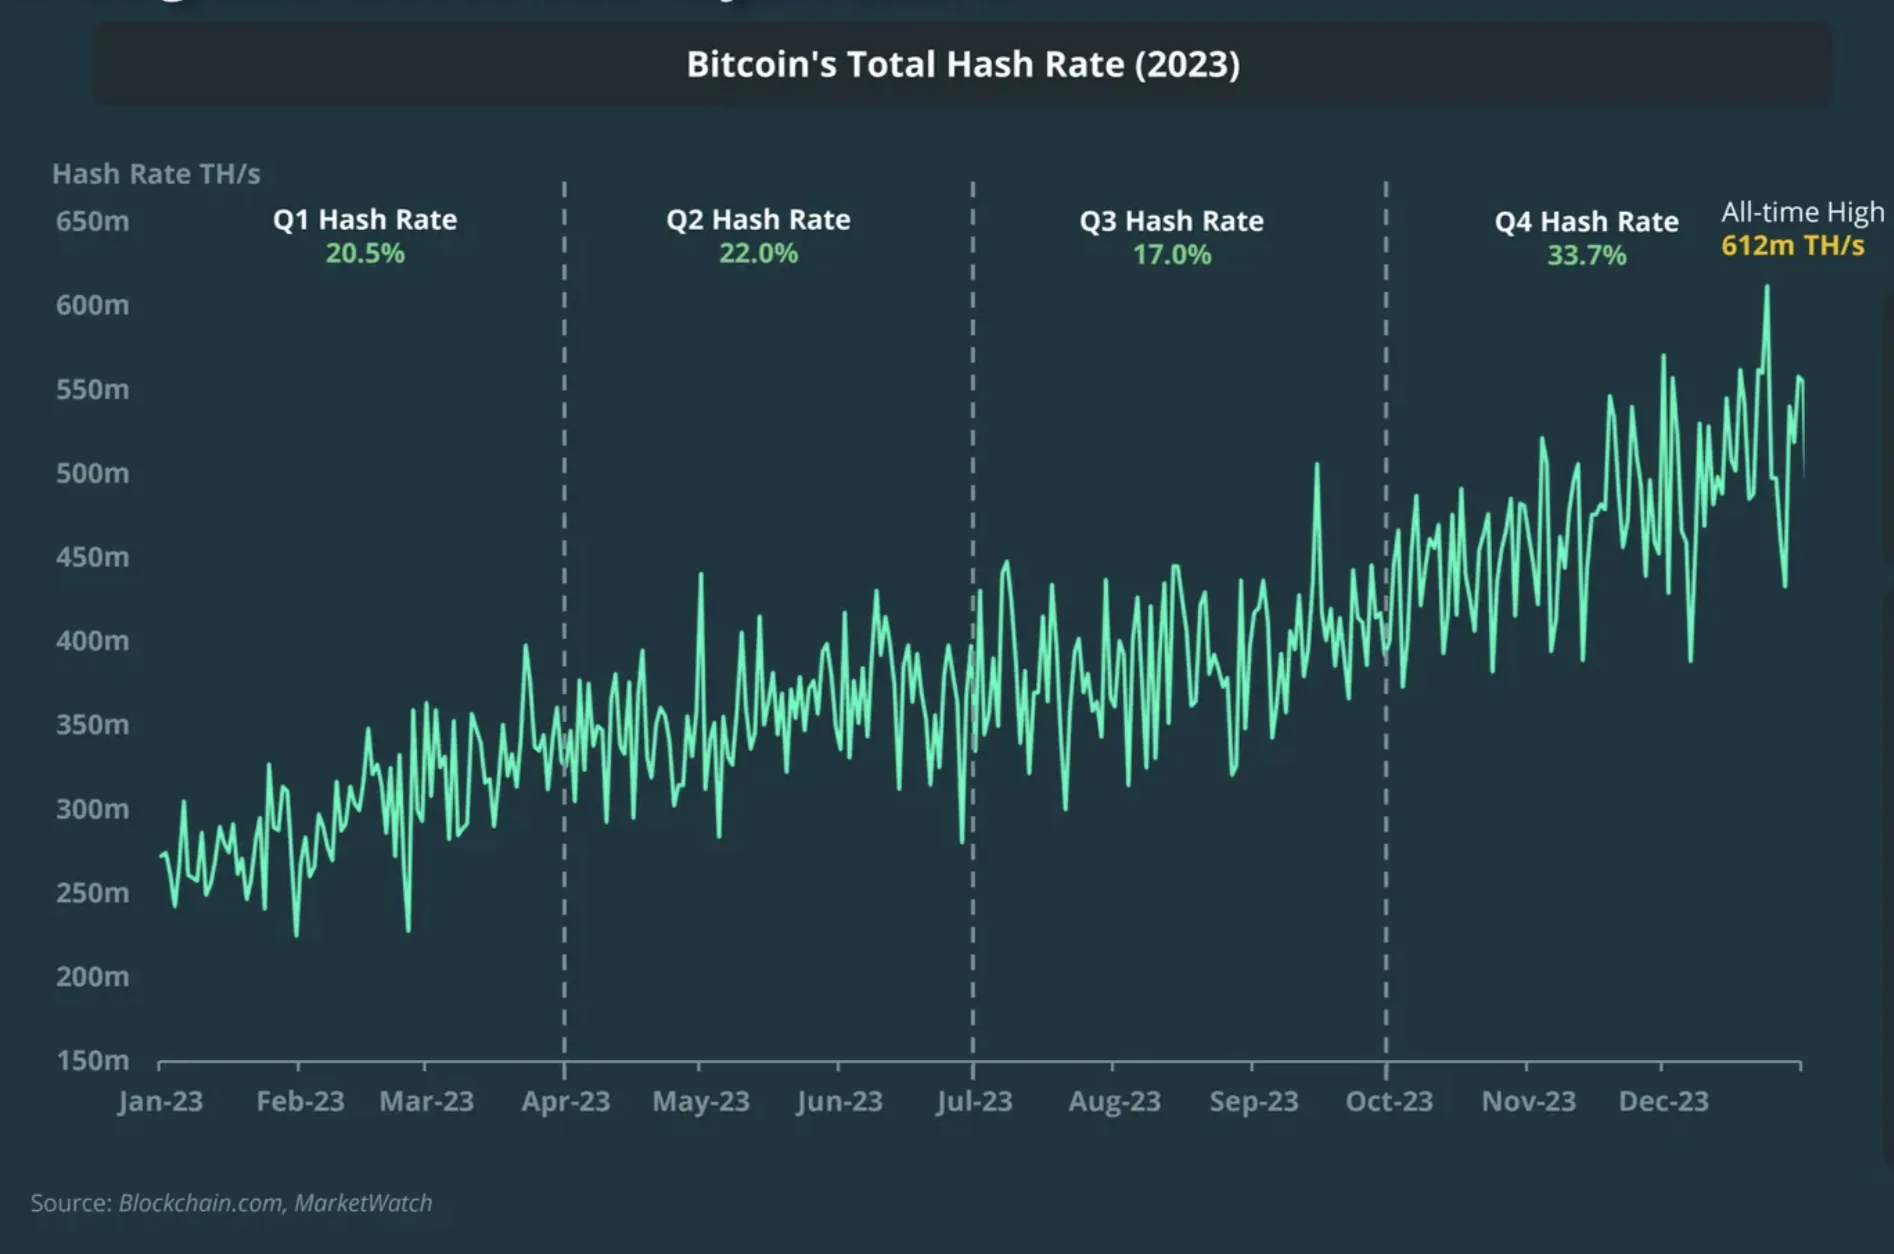 The Bitcoin Hash Rate in Q4 2023 